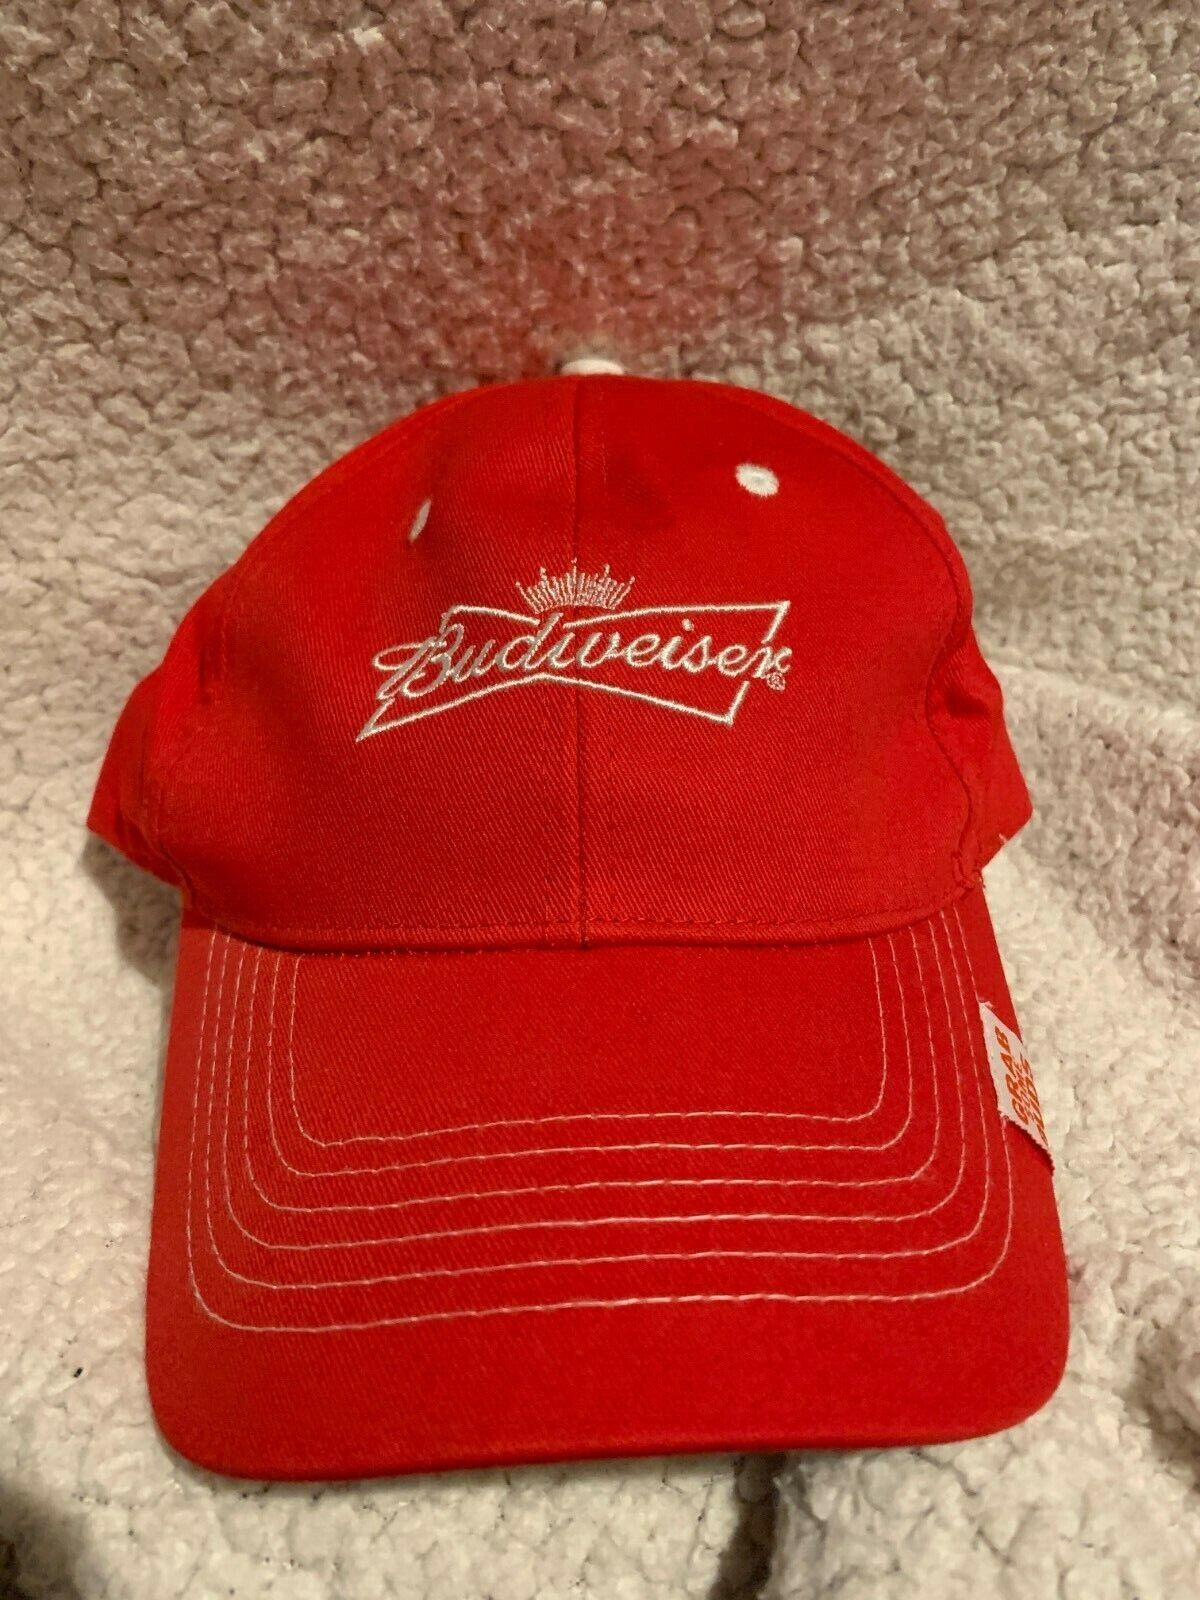 Budweiser Grab Some Buds Adjustable Hat Cap Red White Party Beach 